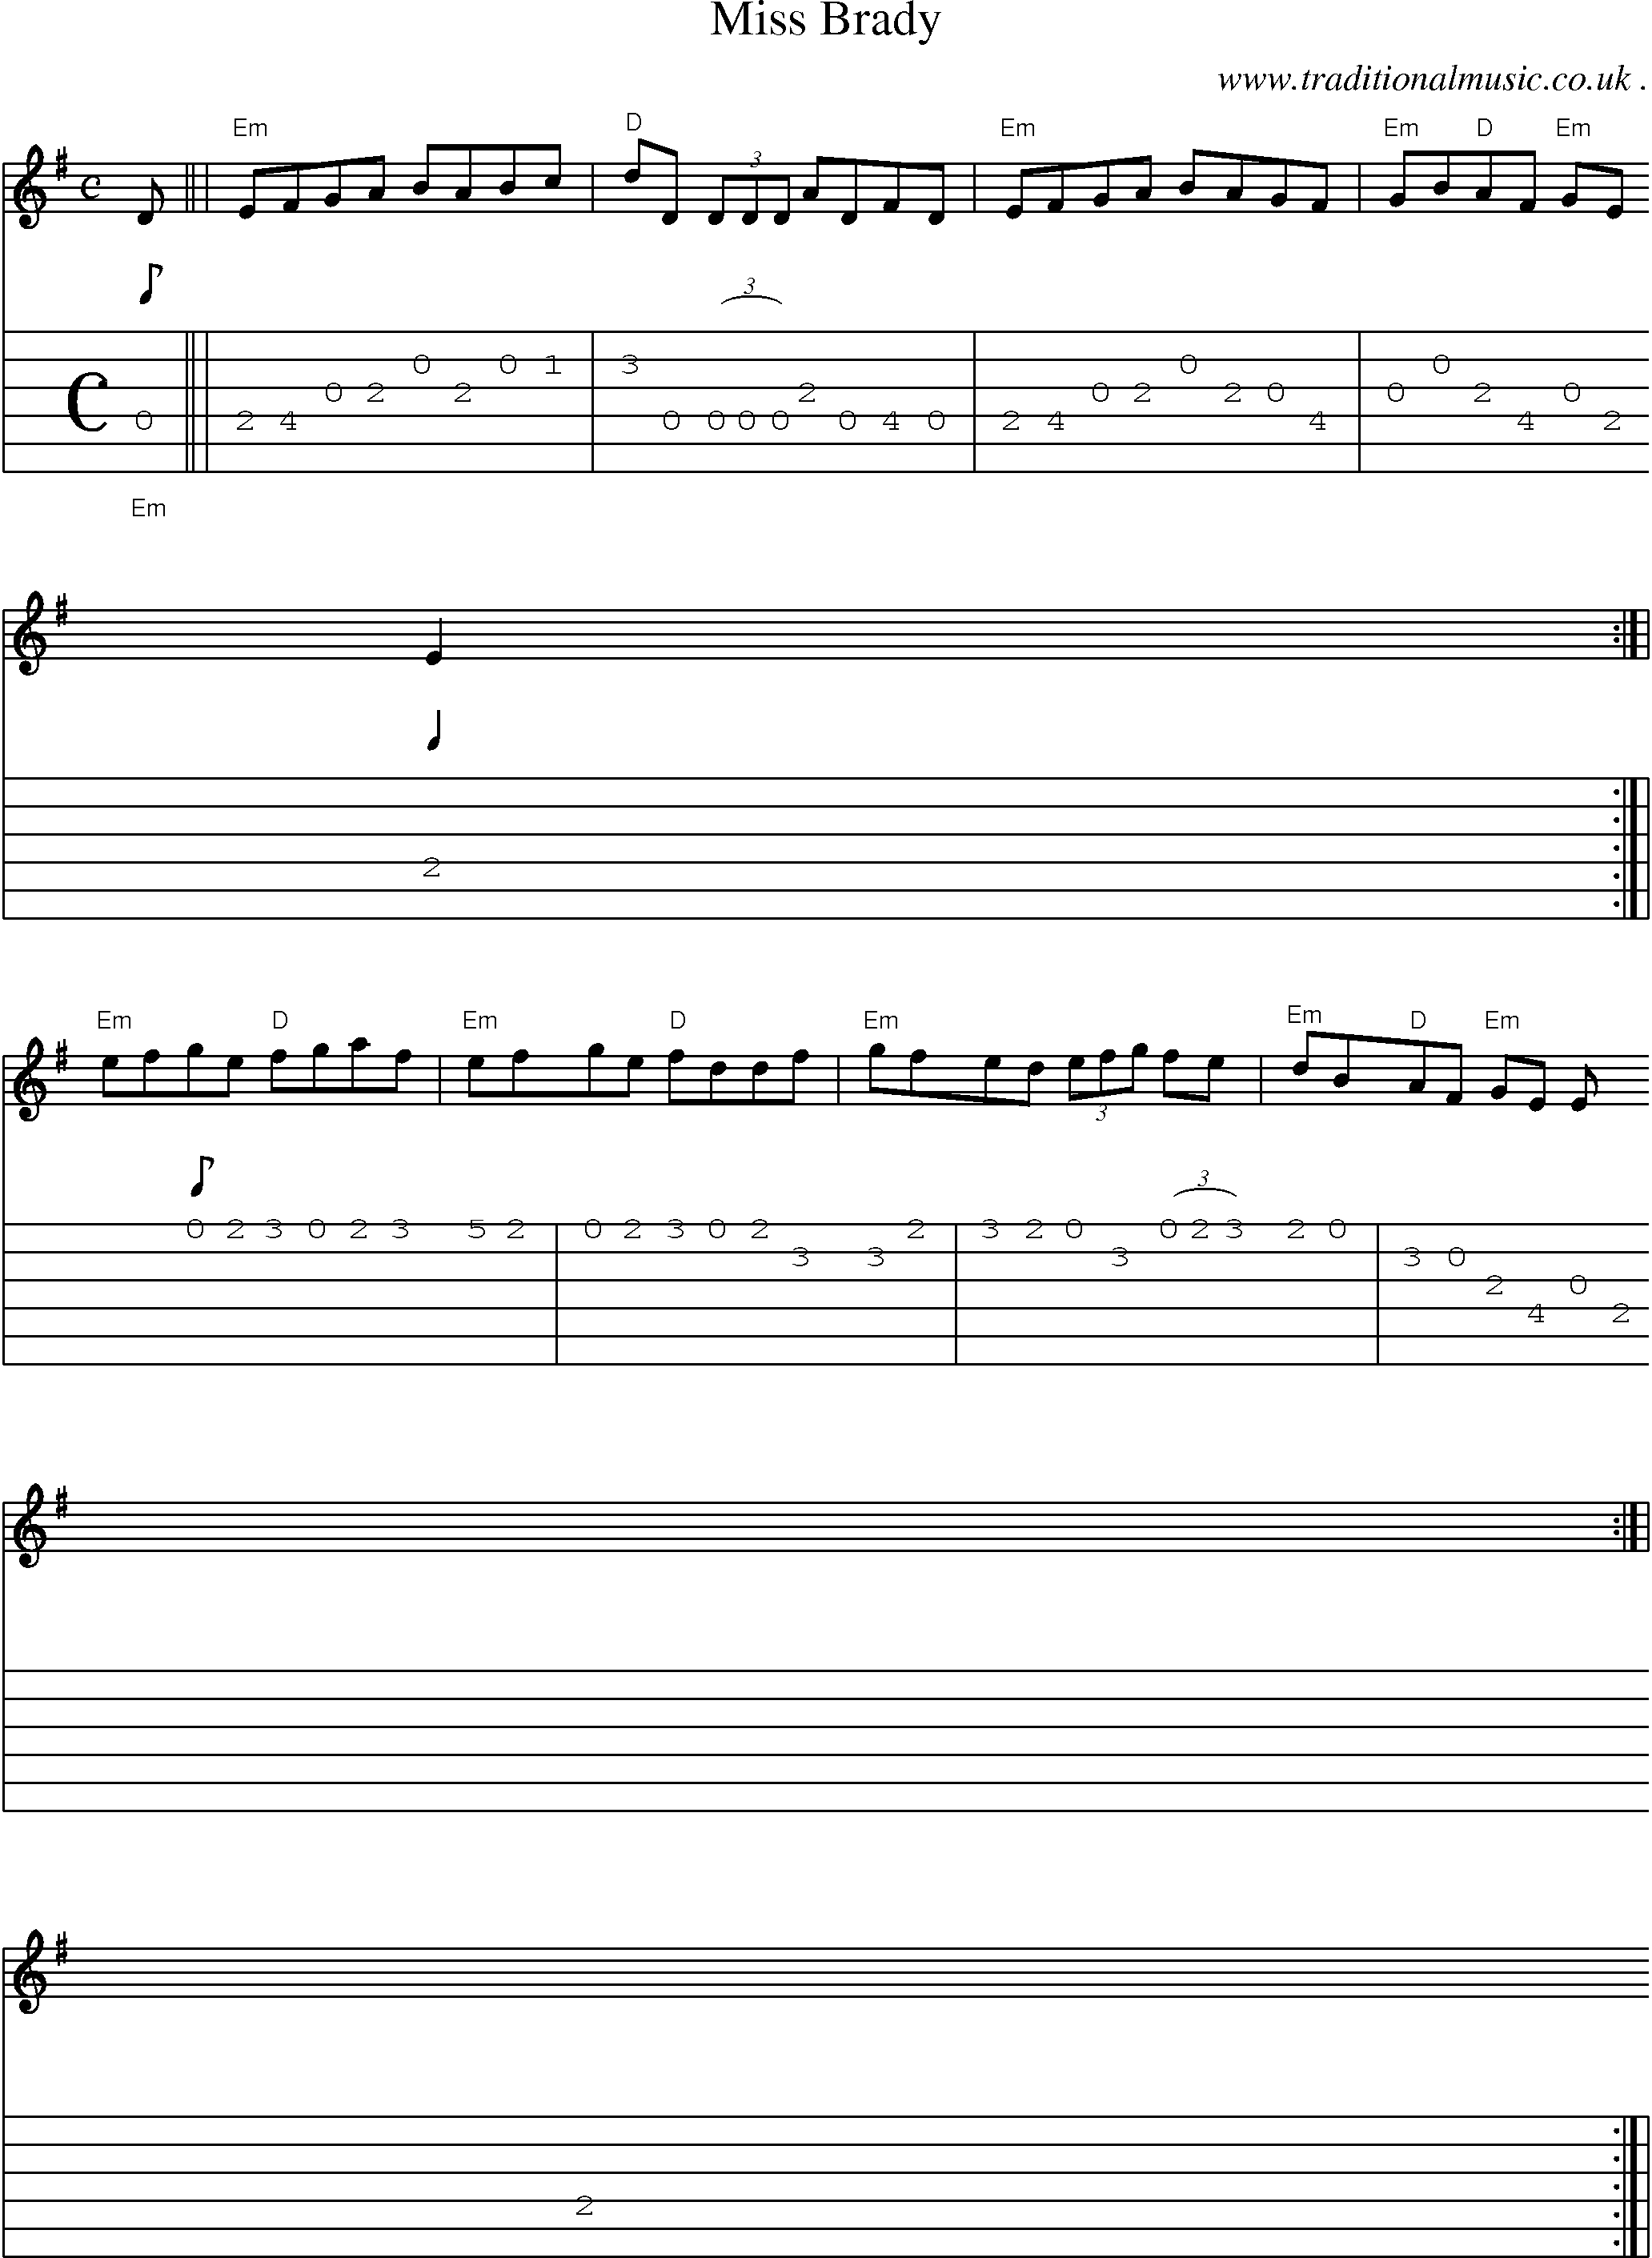 Sheet-music  score, Chords and Guitar Tabs for Miss Brady